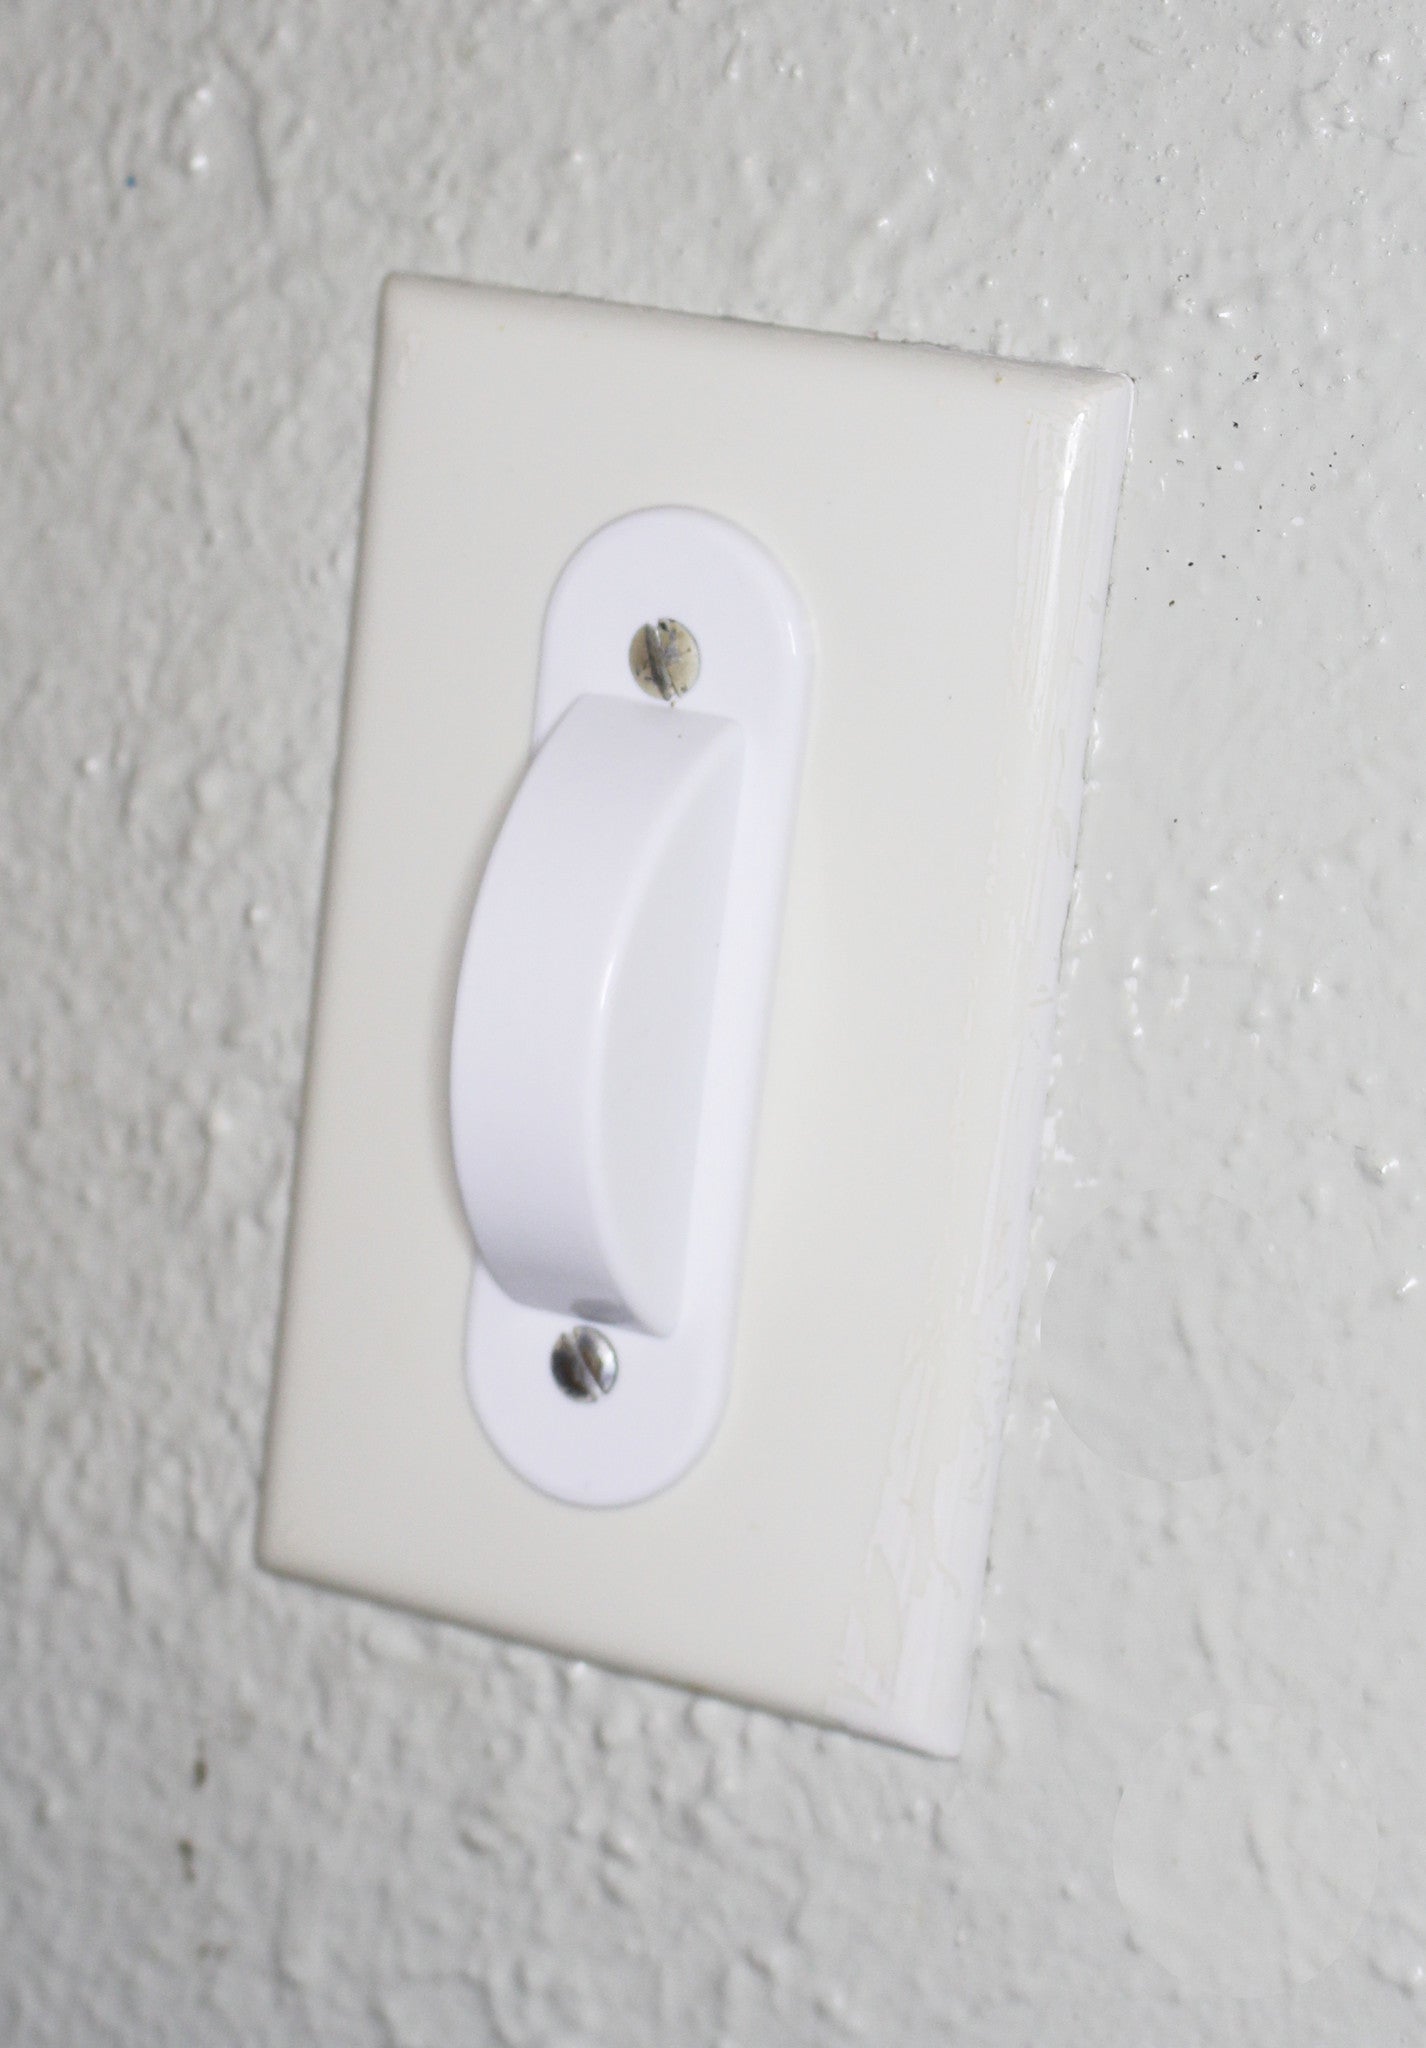 White Switch Plate Cover Guard Keeps Light Switch ON or Off protects your lights or circuits from accidentally being turned on or off.